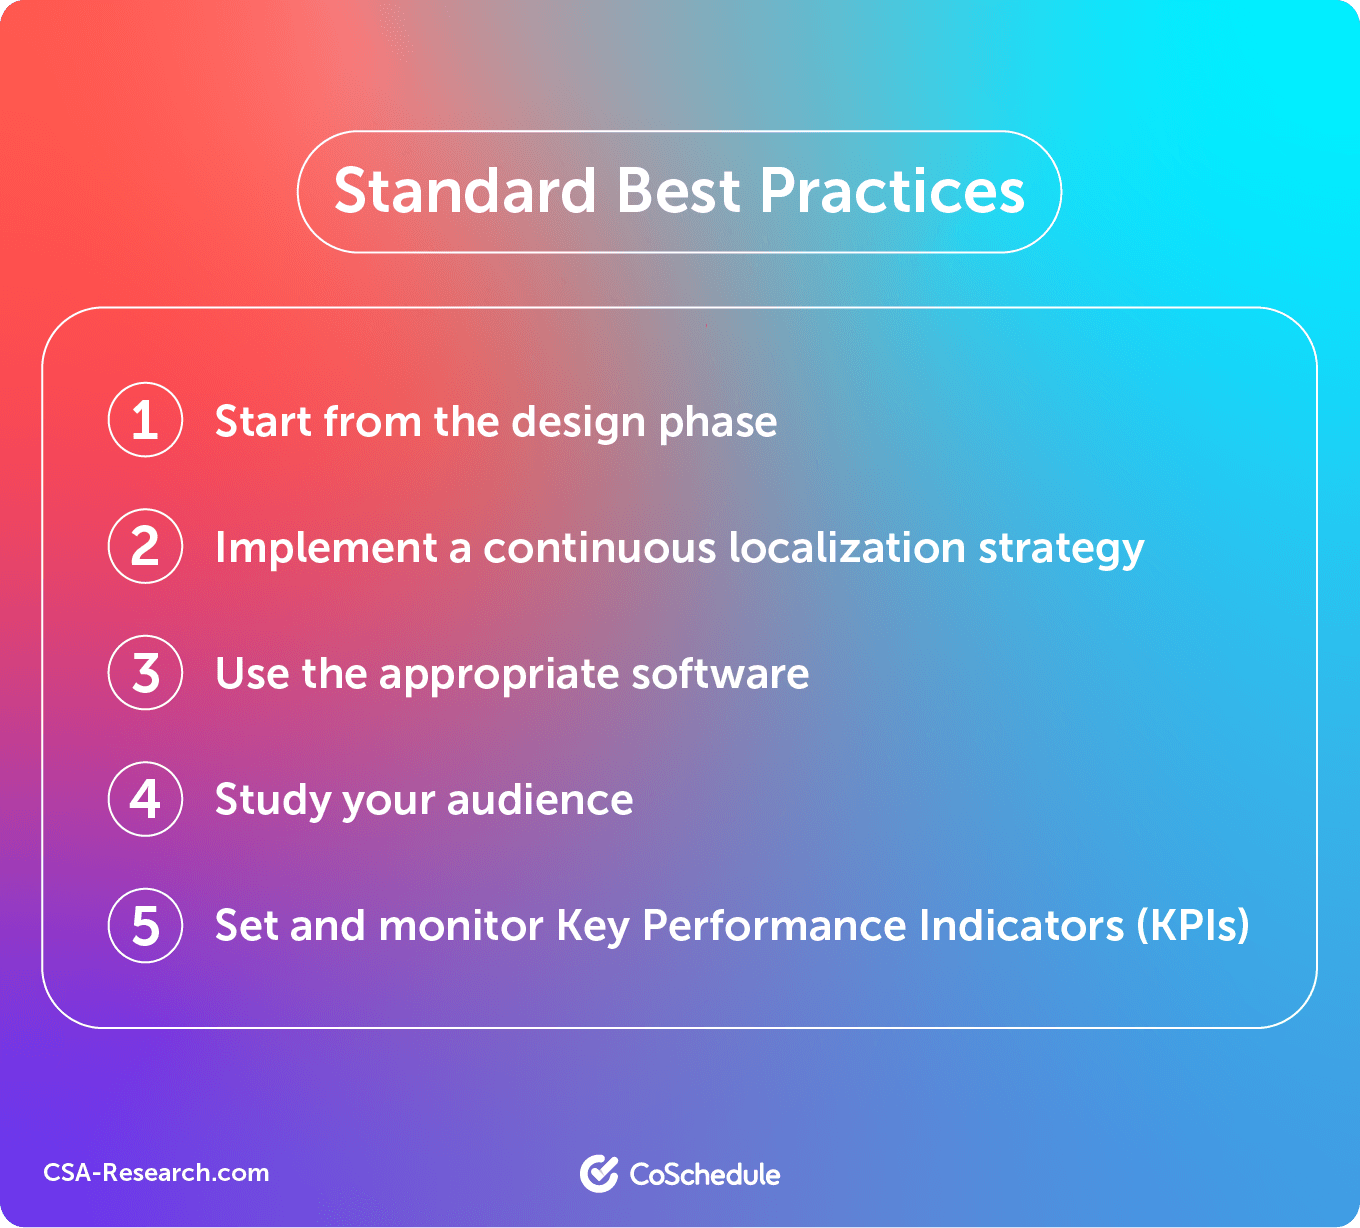 Overview list of the 5 standard best practices for localization